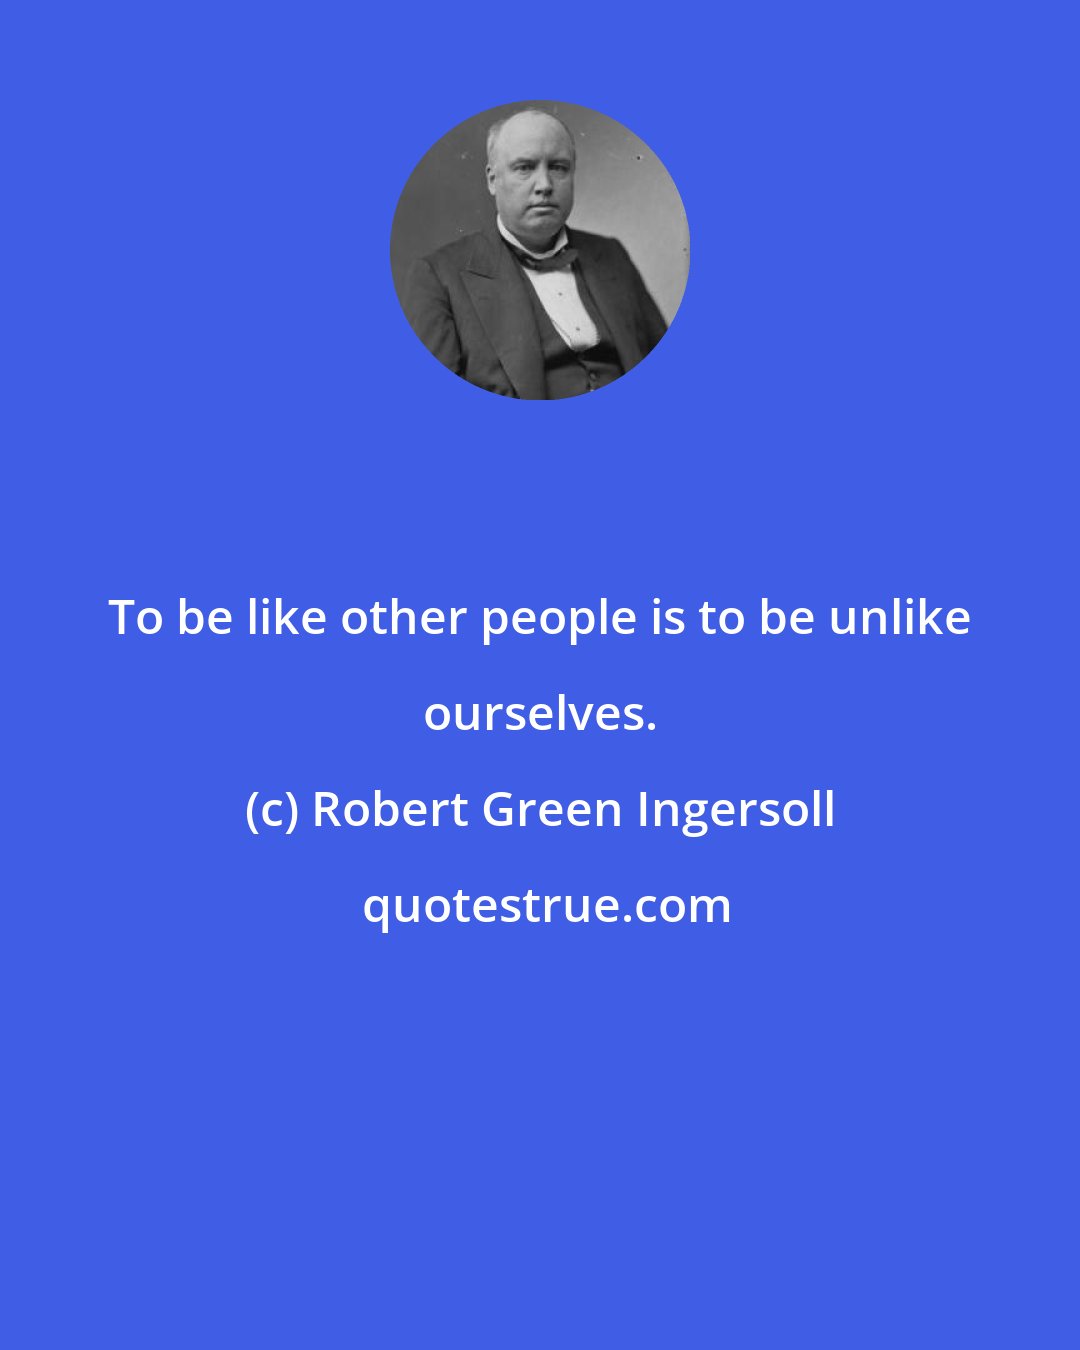 Robert Green Ingersoll: To be like other people is to be unlike ourselves.